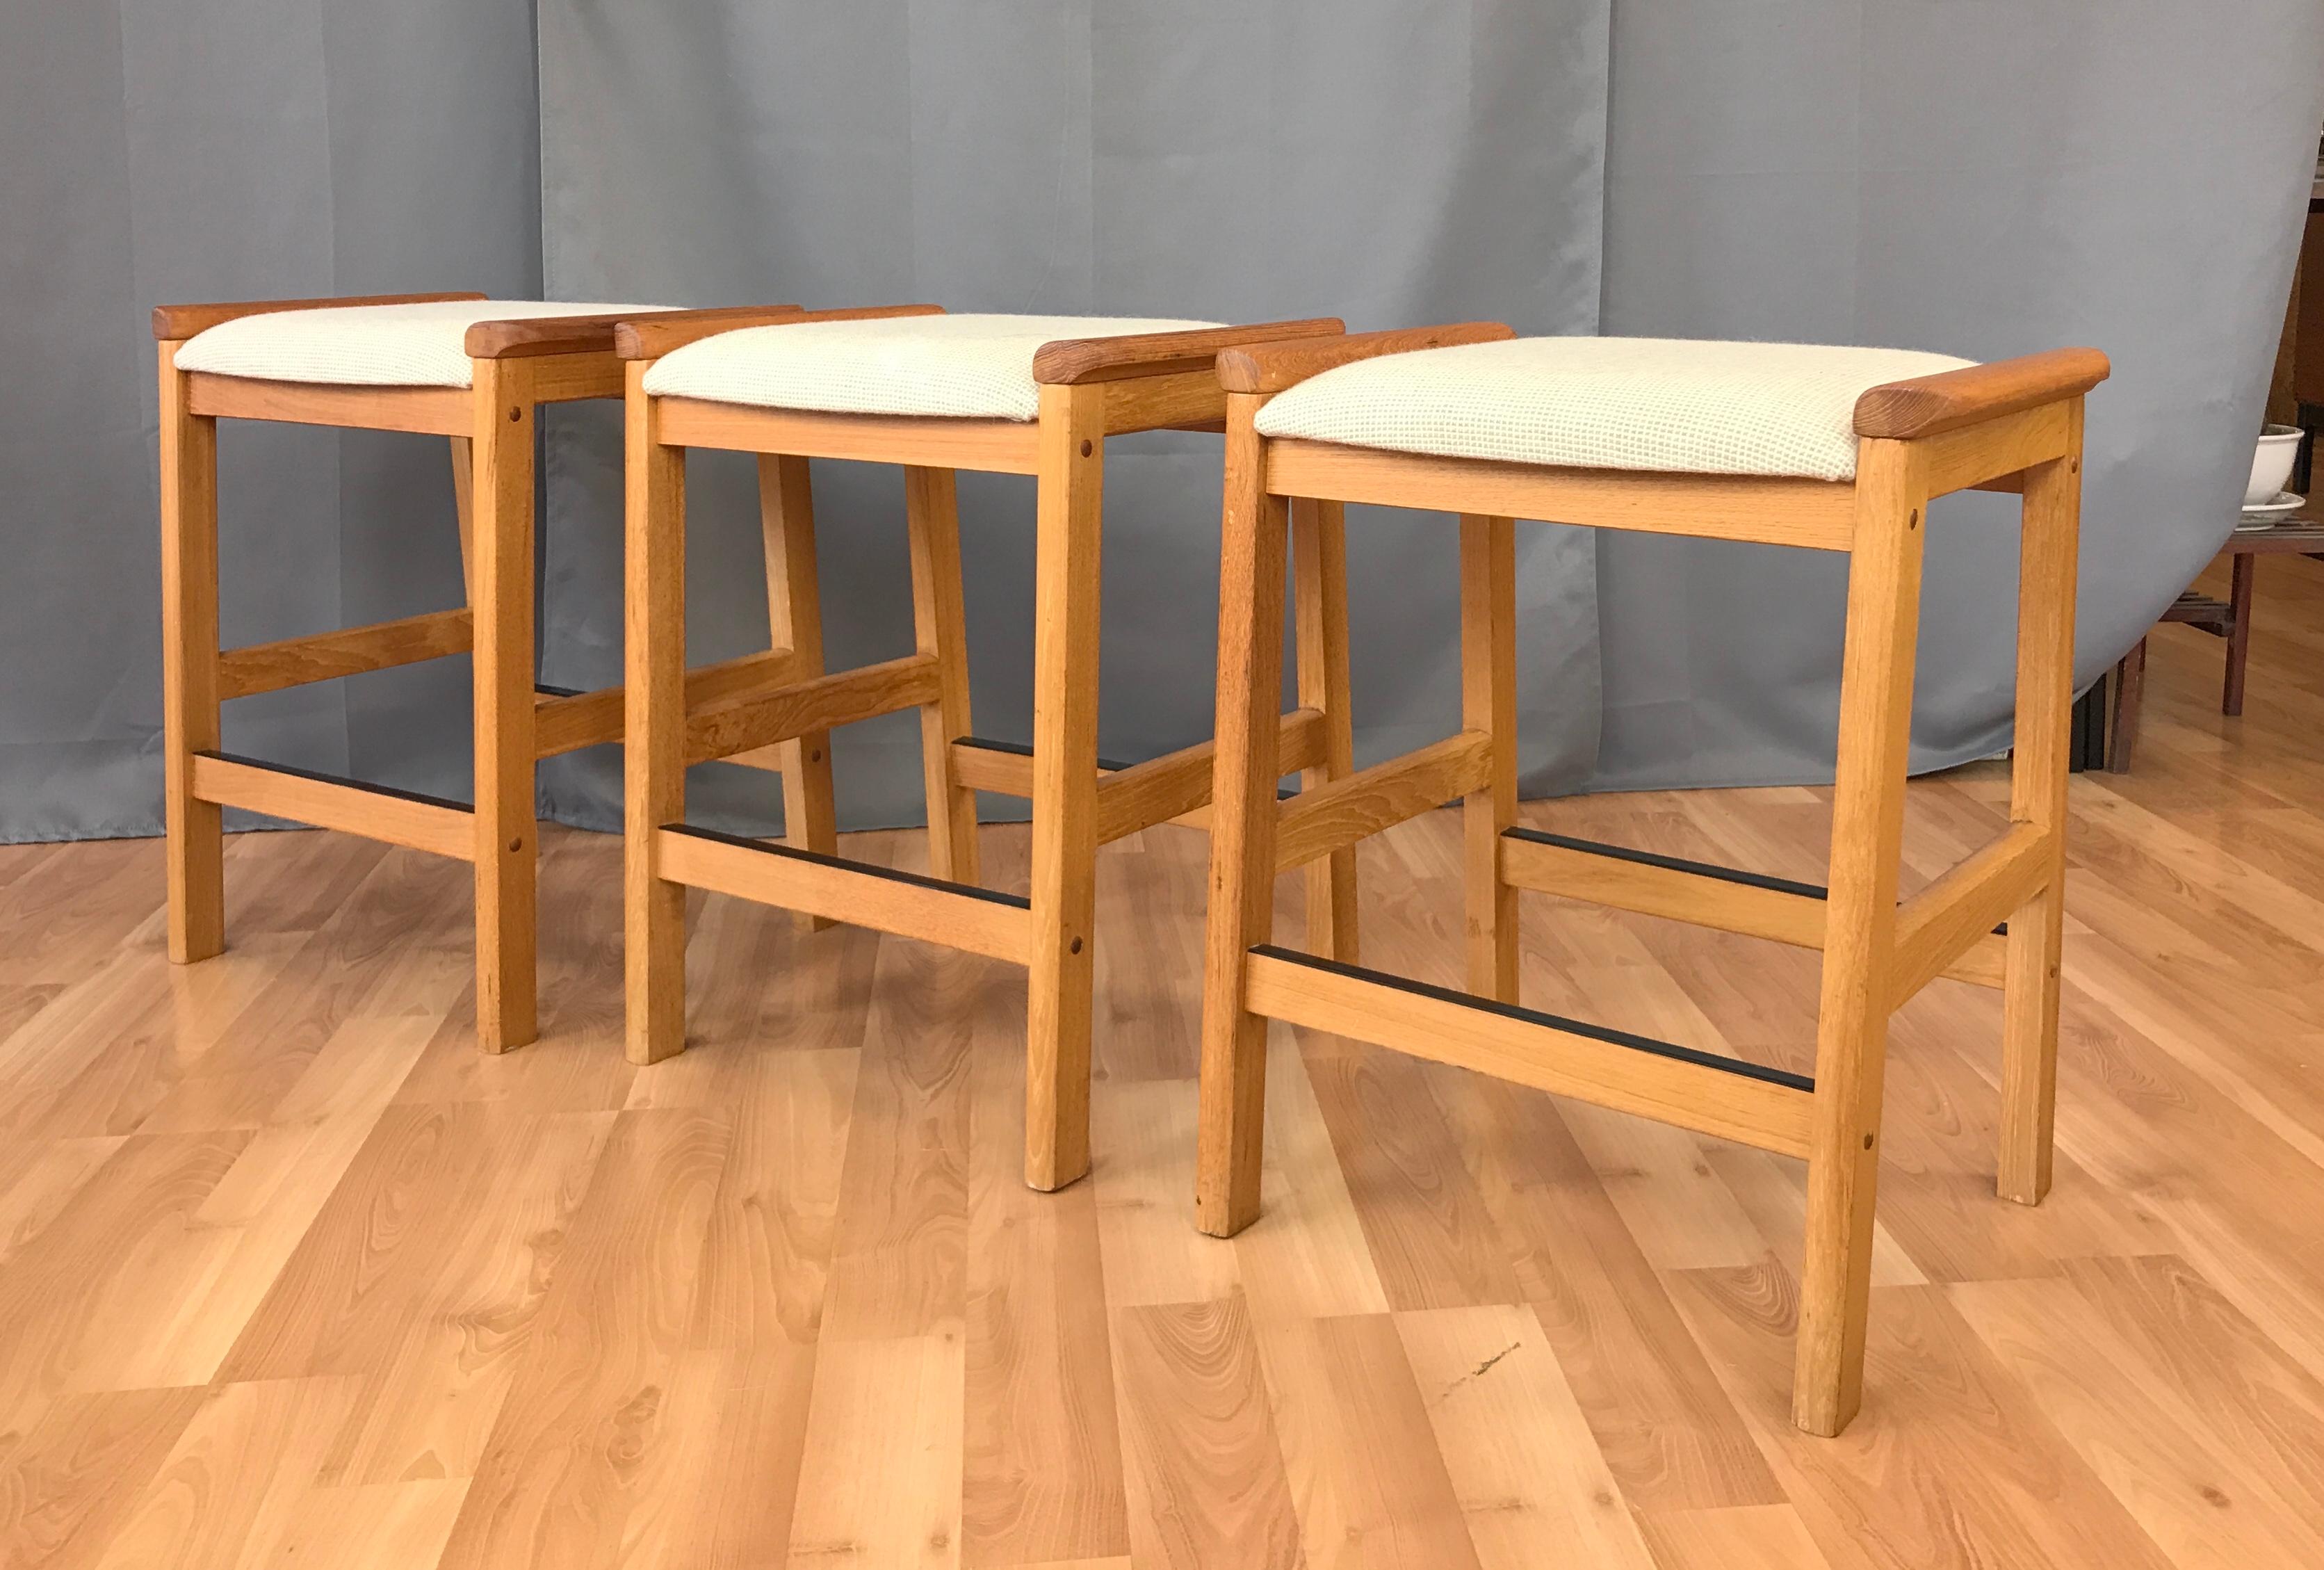 Offered here are a set of three counter stools, a J.L. Møller design for Højbjerg of Denmark.
Solid Teak legs and arms, foot rests on two sides of the stools, wool fabric upholstery in an oatmeal color.